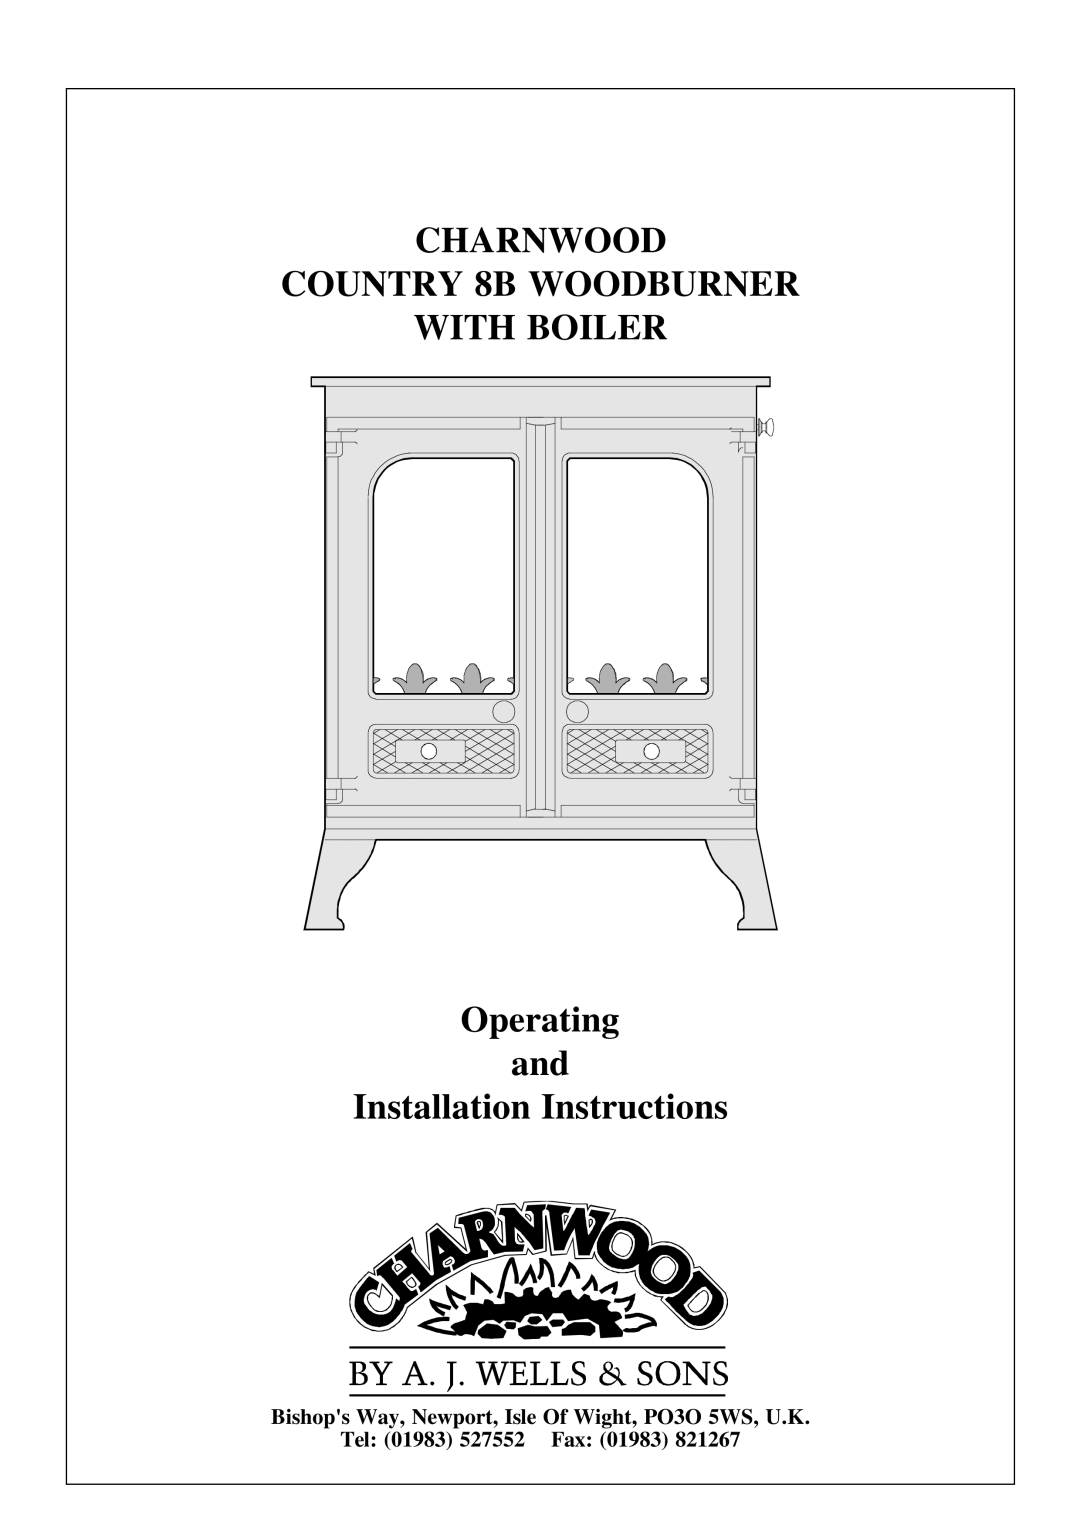 Charnwood Country 8B installation instructions CHARNWOOD COUNTRY 8B WOODBURNER WITH BOILER Operating and 